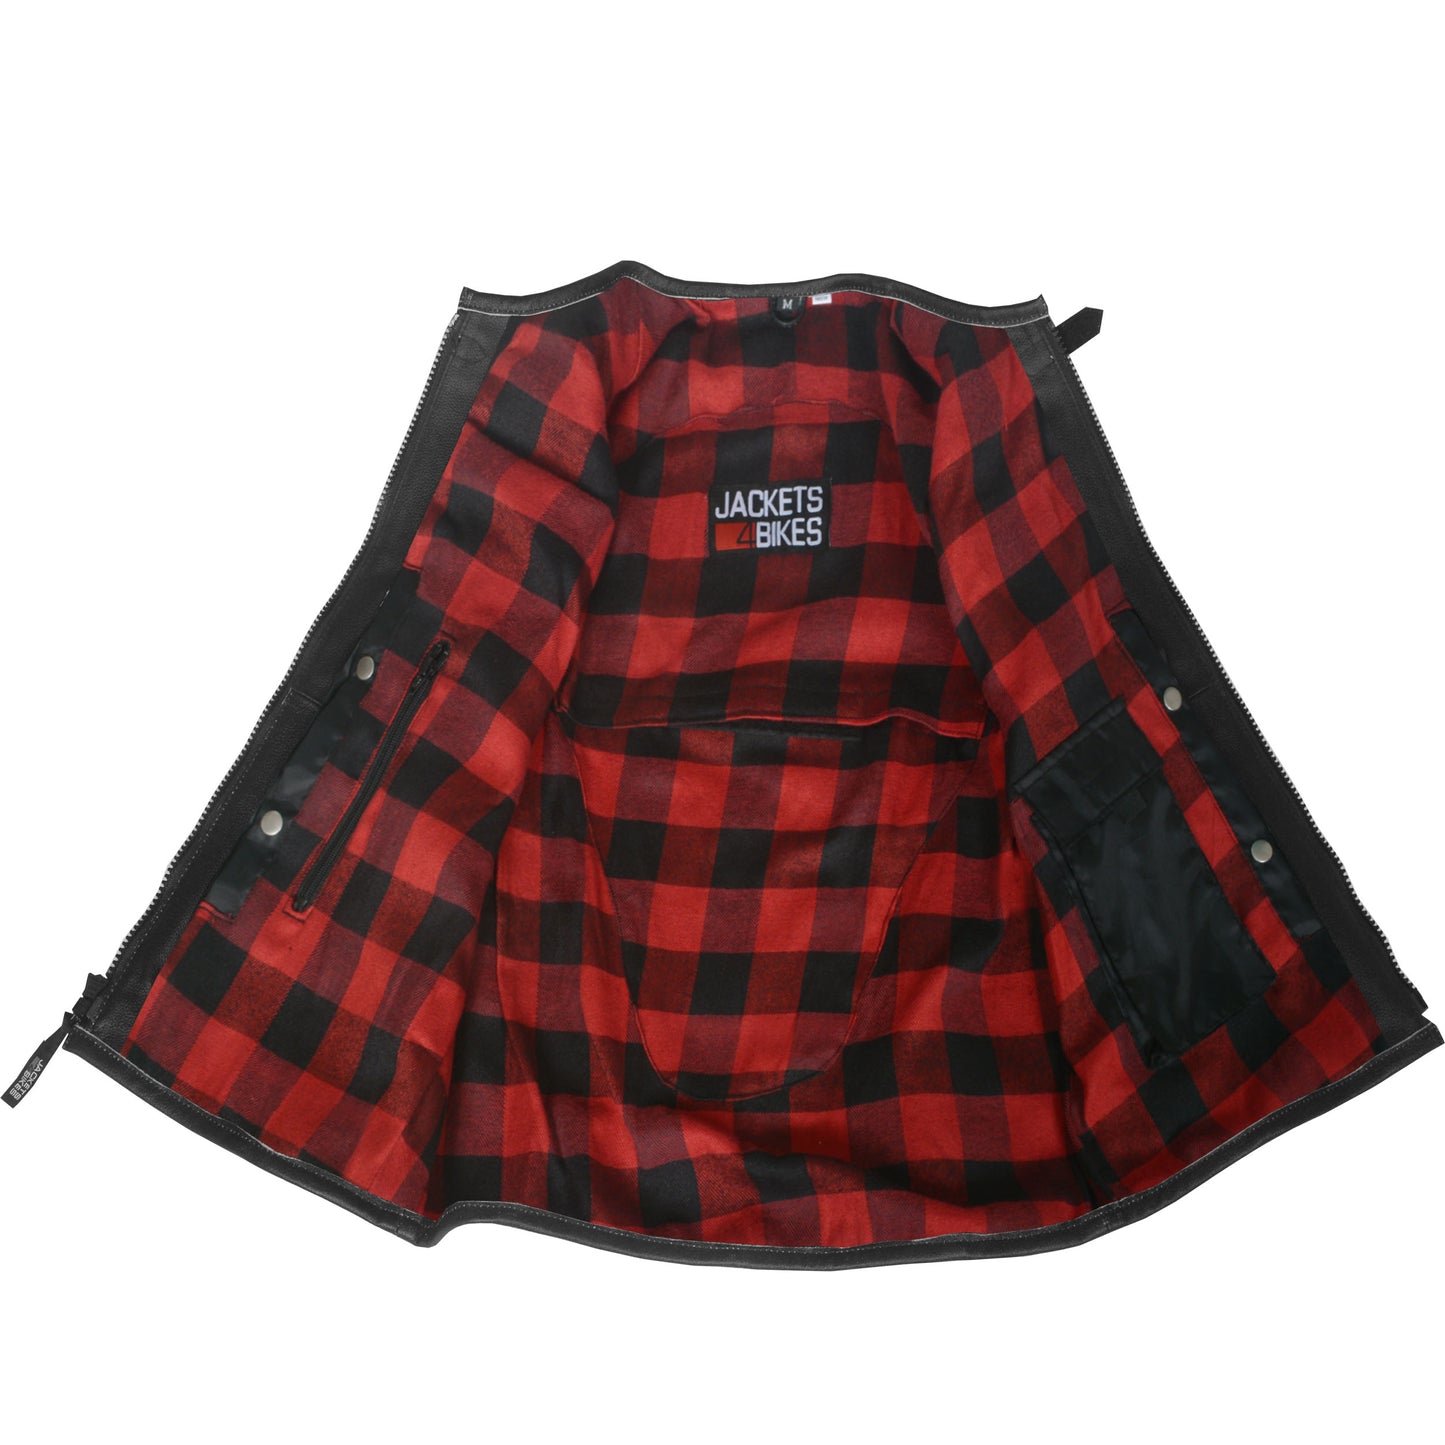 BIKER MOTORCYCLE LEATHER VEST STYLISH Flannel Red